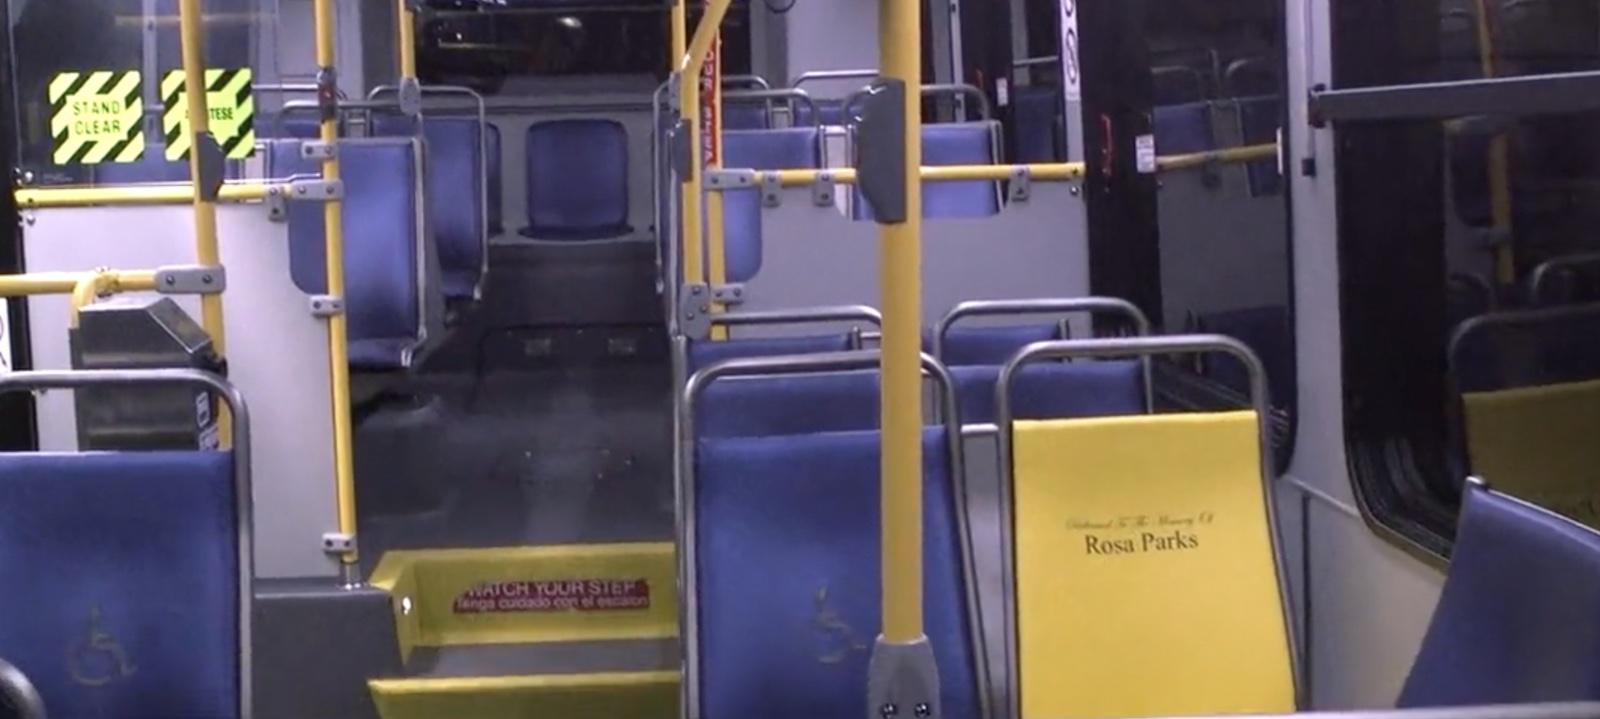 Still from Houston Metro's announcement video shared on Twitter. Shows whole seat, not detail